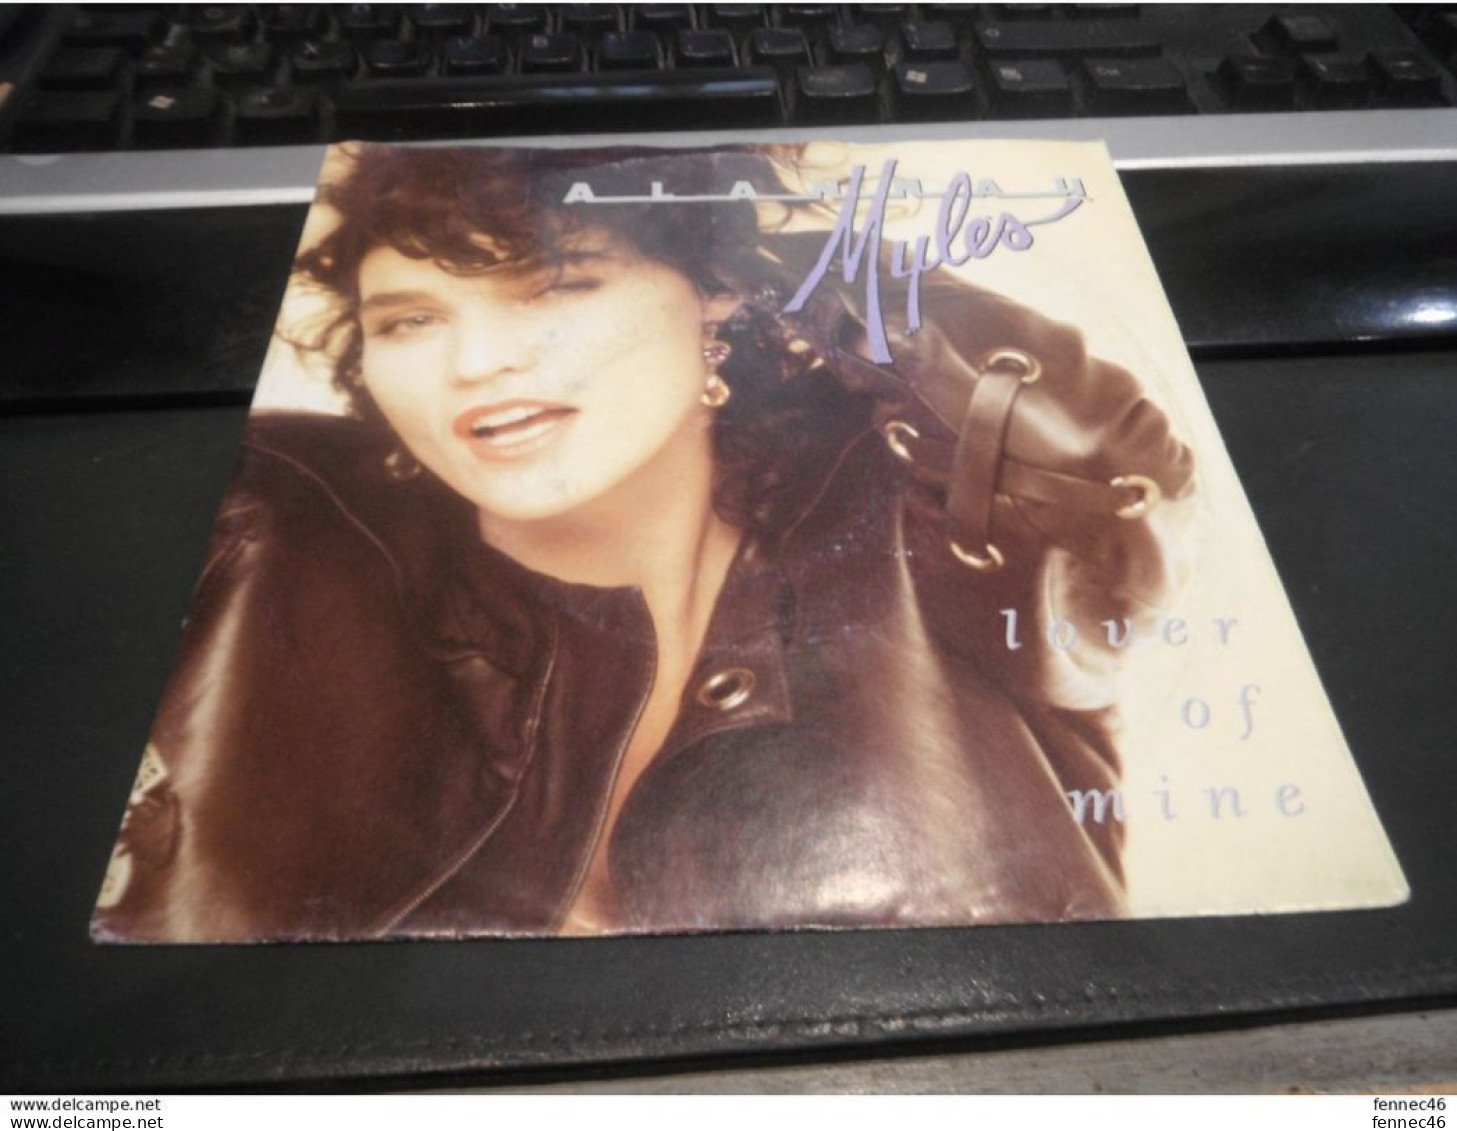 Vinyle  45T - Alannah MYLES - Lover Of Mine - Just One Kiss - Other - English Music